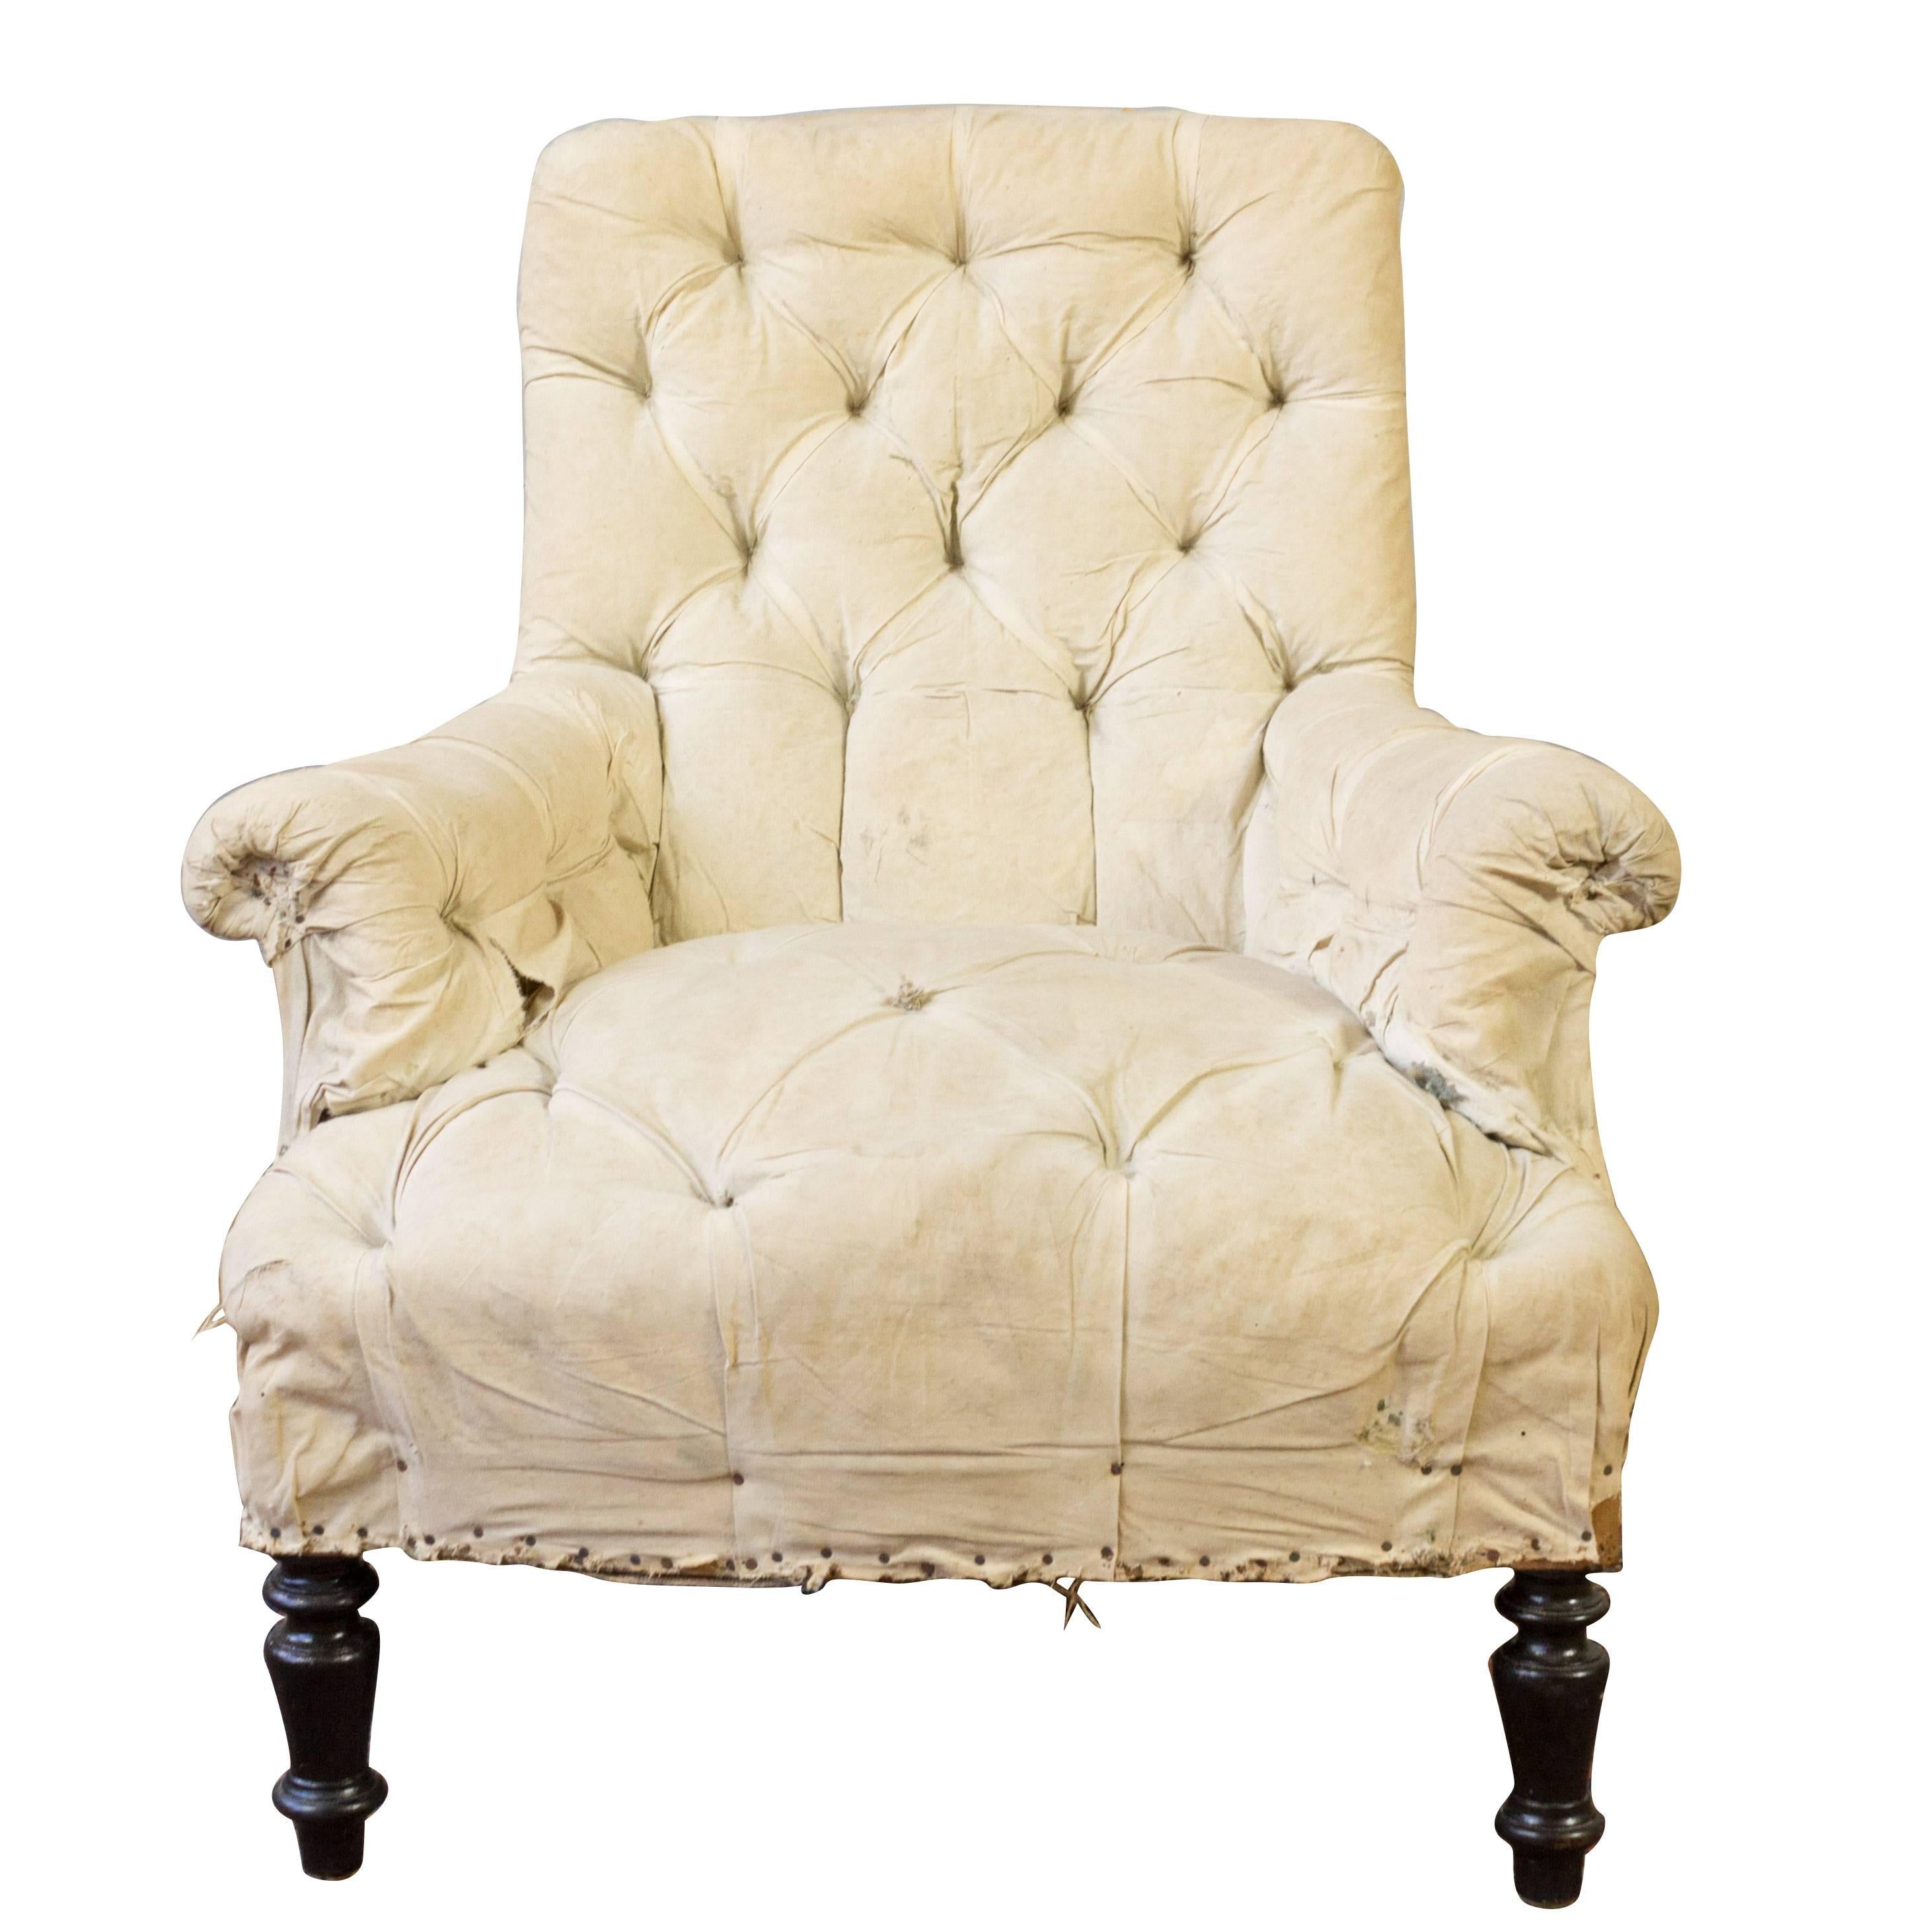 Single 19th Century Tufted French Armchair